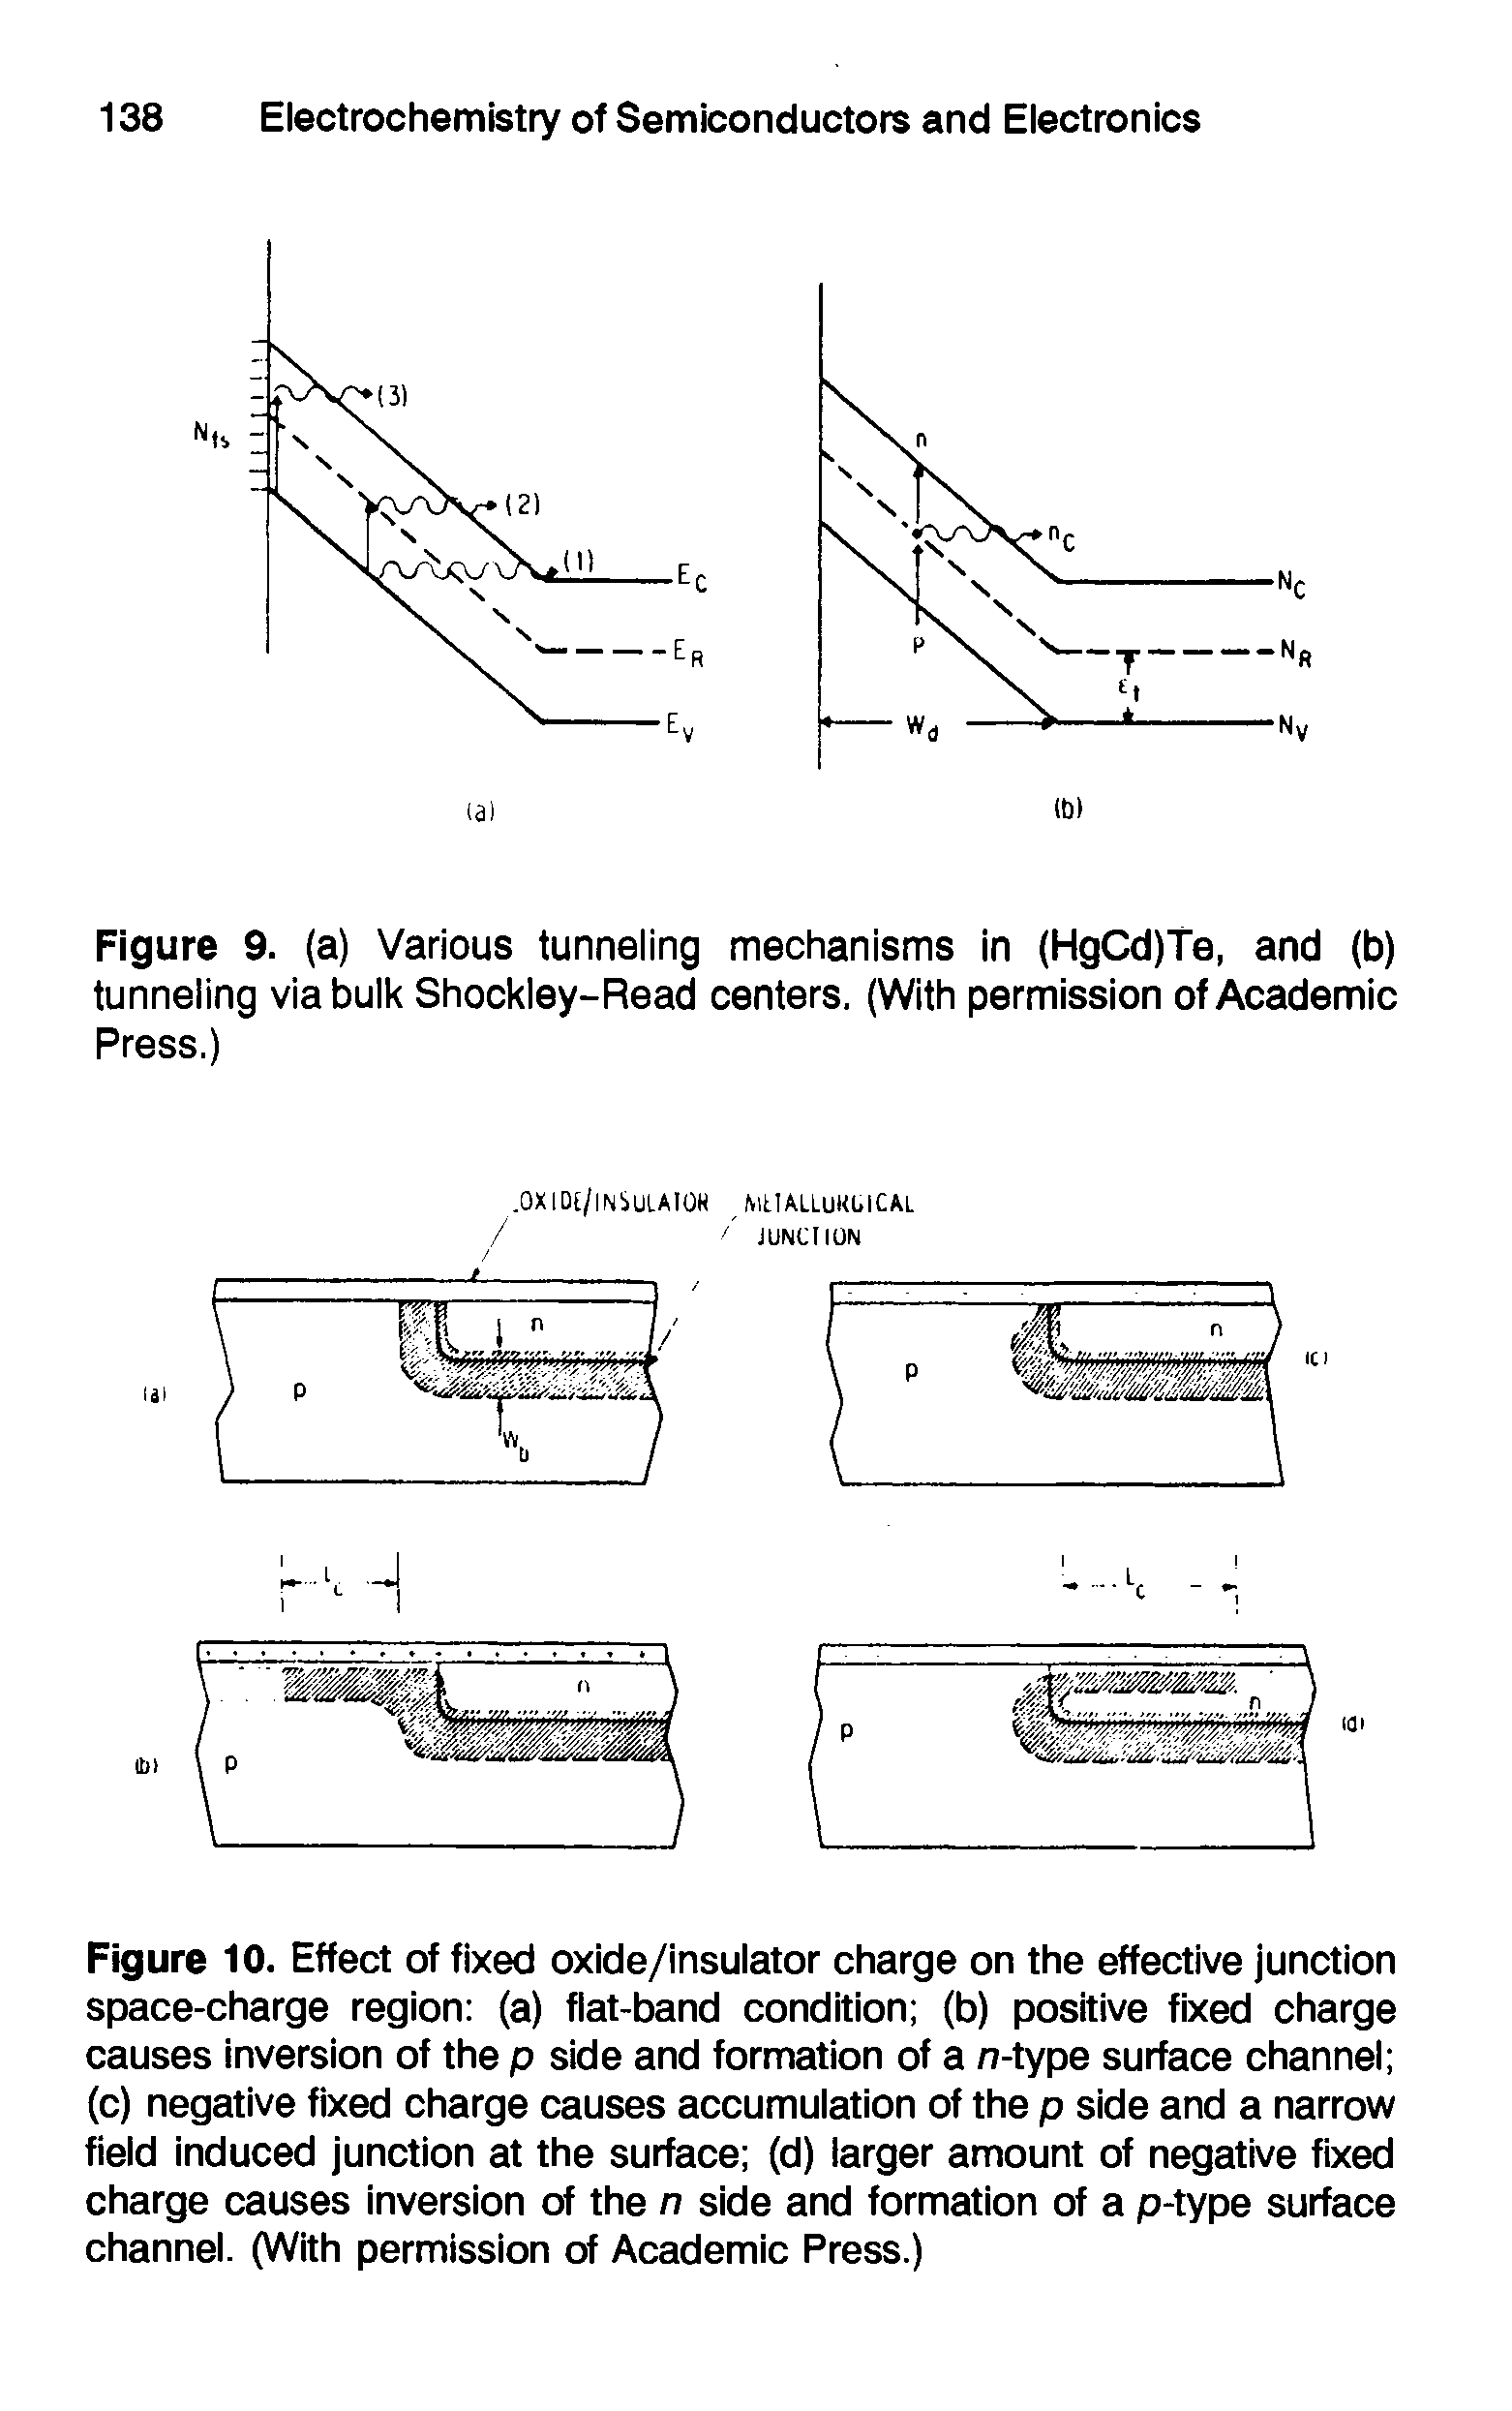 Figure 10. Effect of fixed oxide/insulator charge on the effective junction space-charge region (a) flat-band condition (b) positive fixed charge causes inversion of the p side and formation of a n-type surface channel (c) negative fixed charge causes accumulation of the p side and a narrow field induced junction at the surface (d) larger amount of negative fixed charge causes inversion of the n side and formation of a p-type surface channel. (With permission of Academic Press.)...